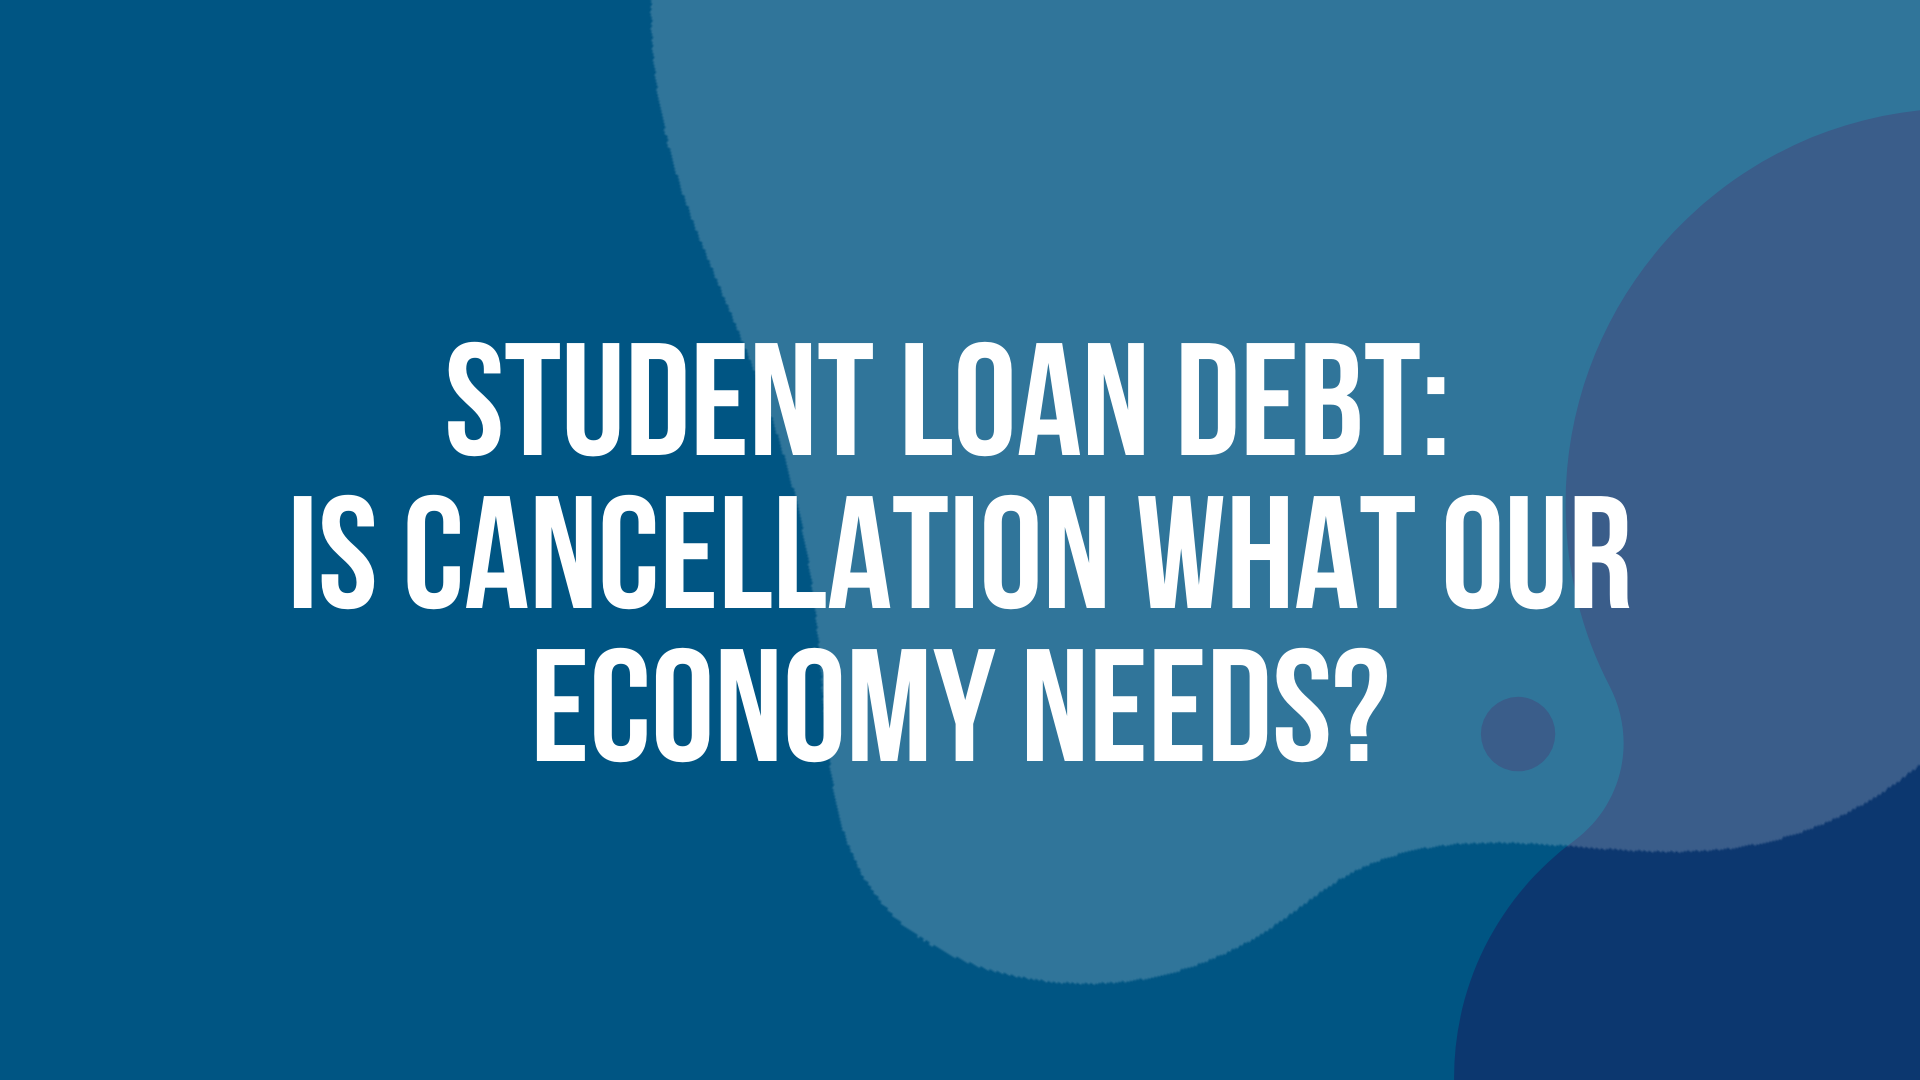 Student Loan Debt: Is Cancellation What Our Economy Needs?